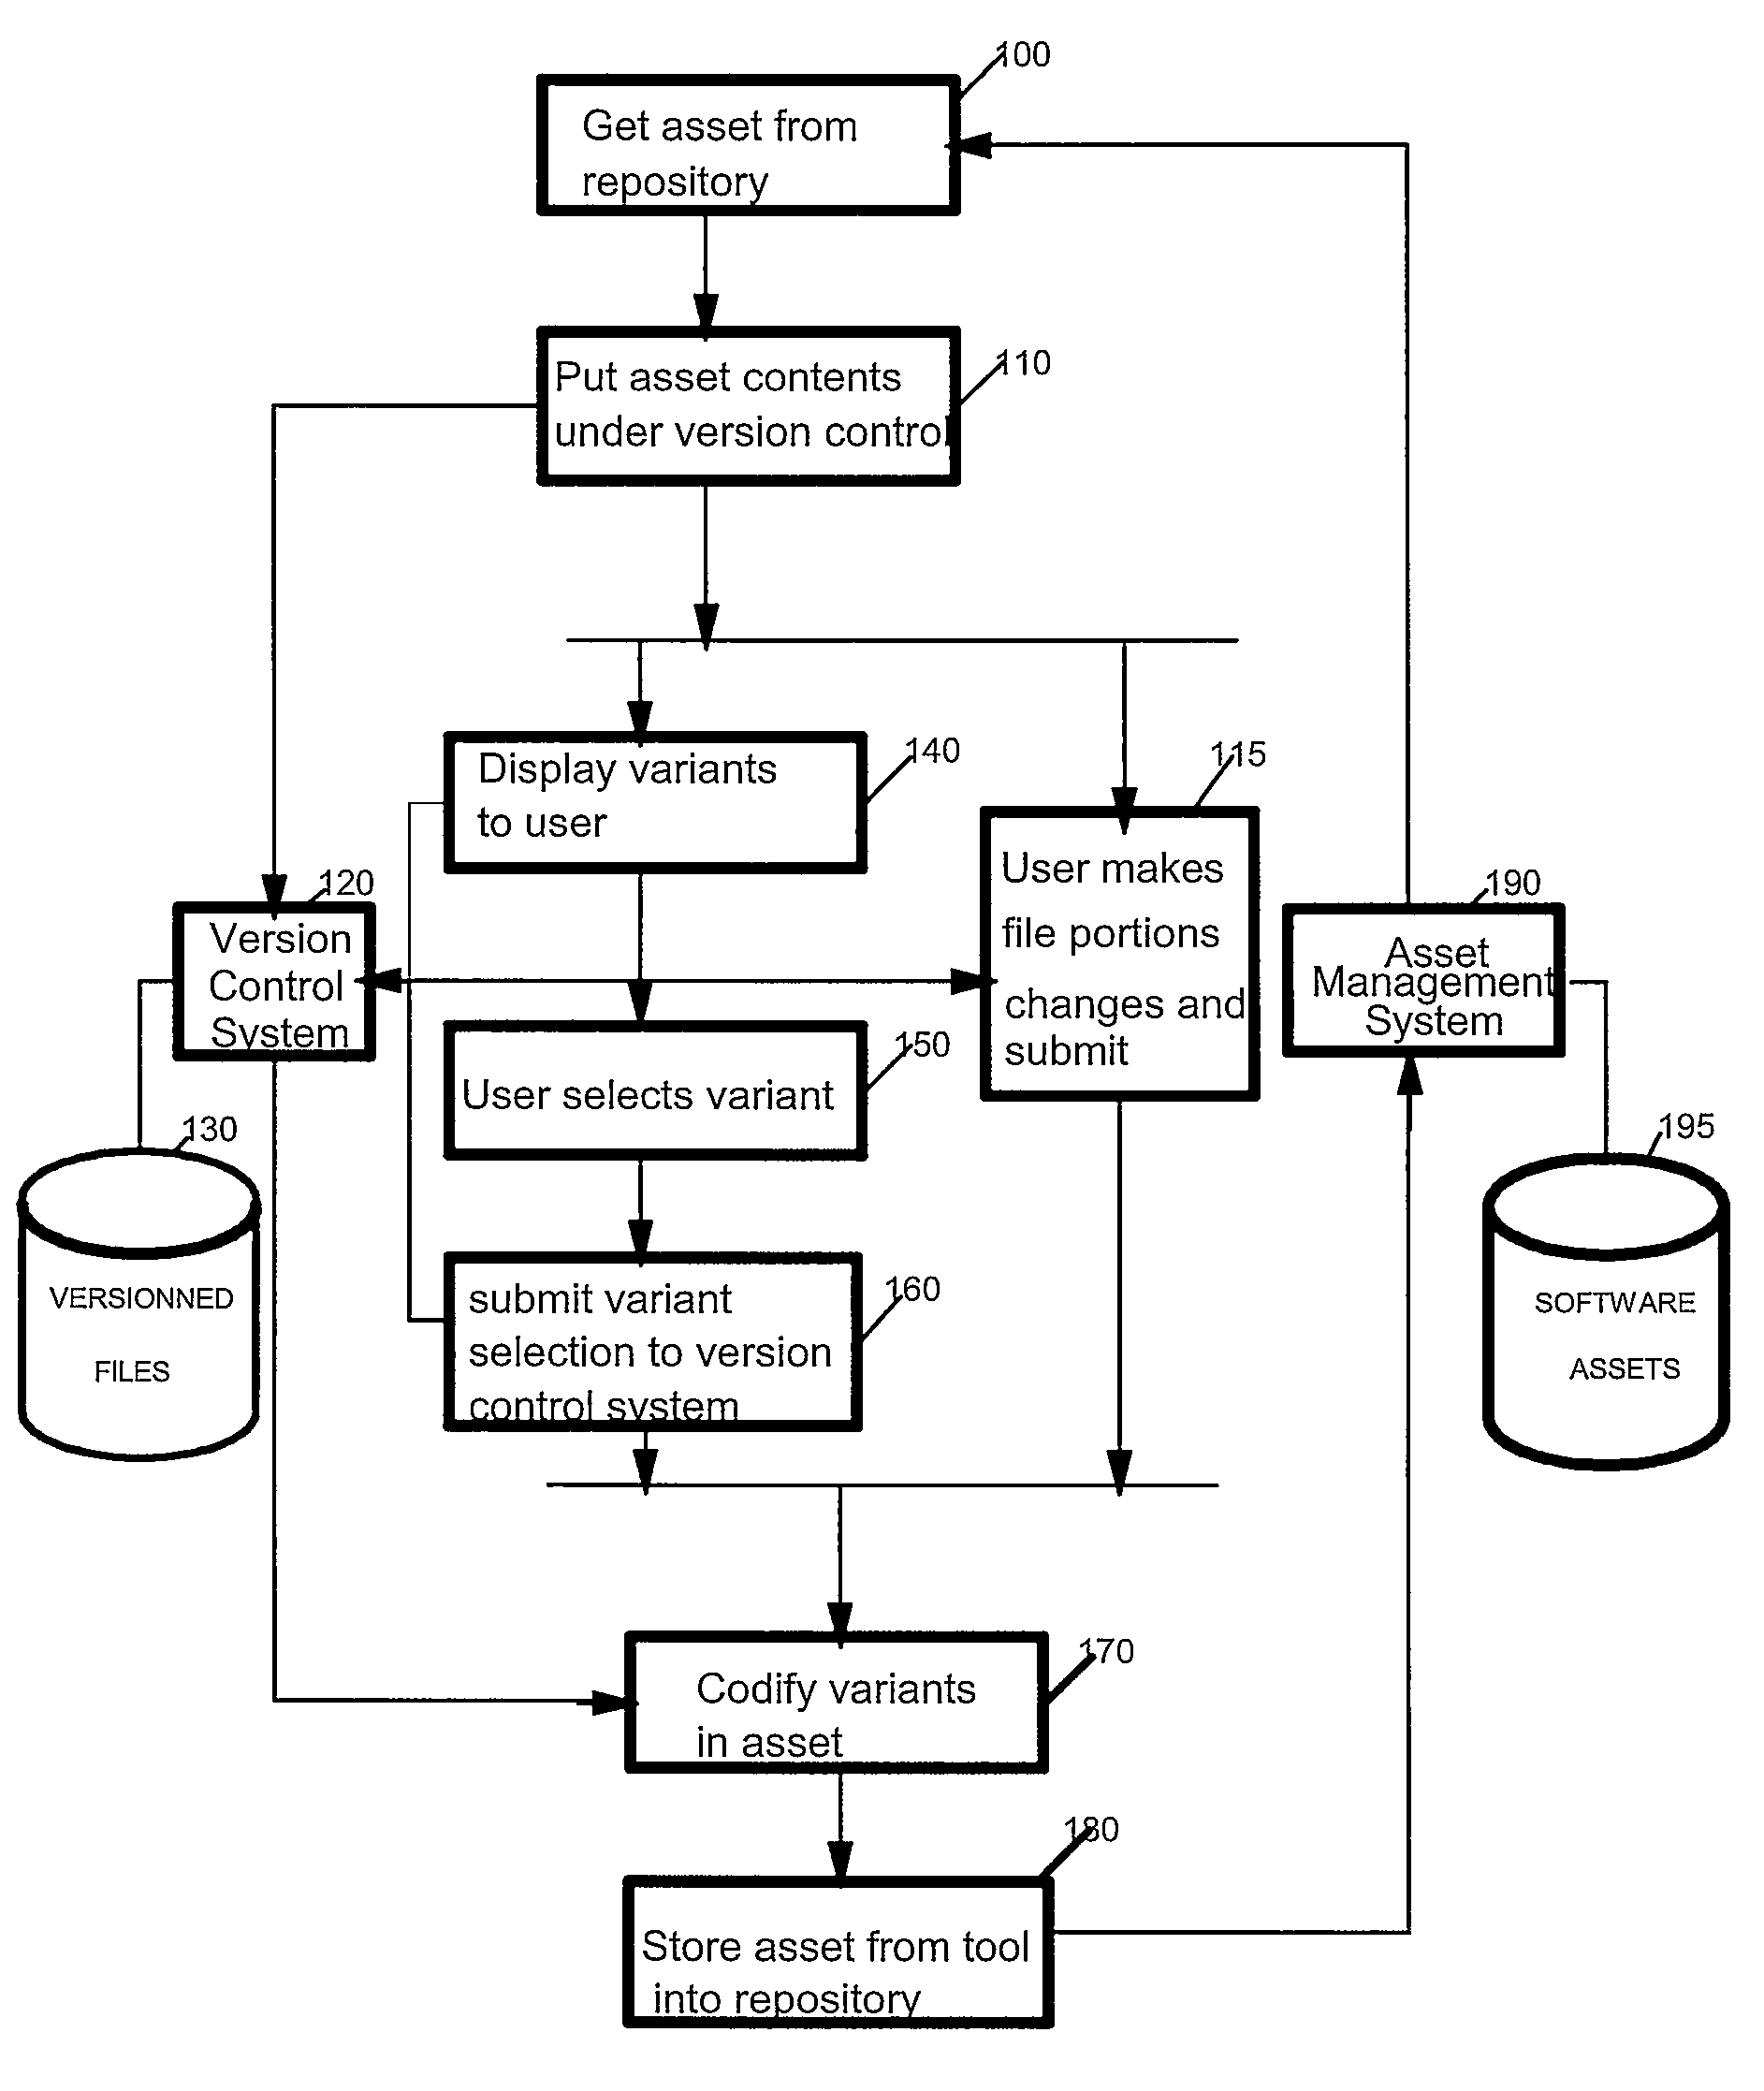 Managing variants of artifacts in a software process